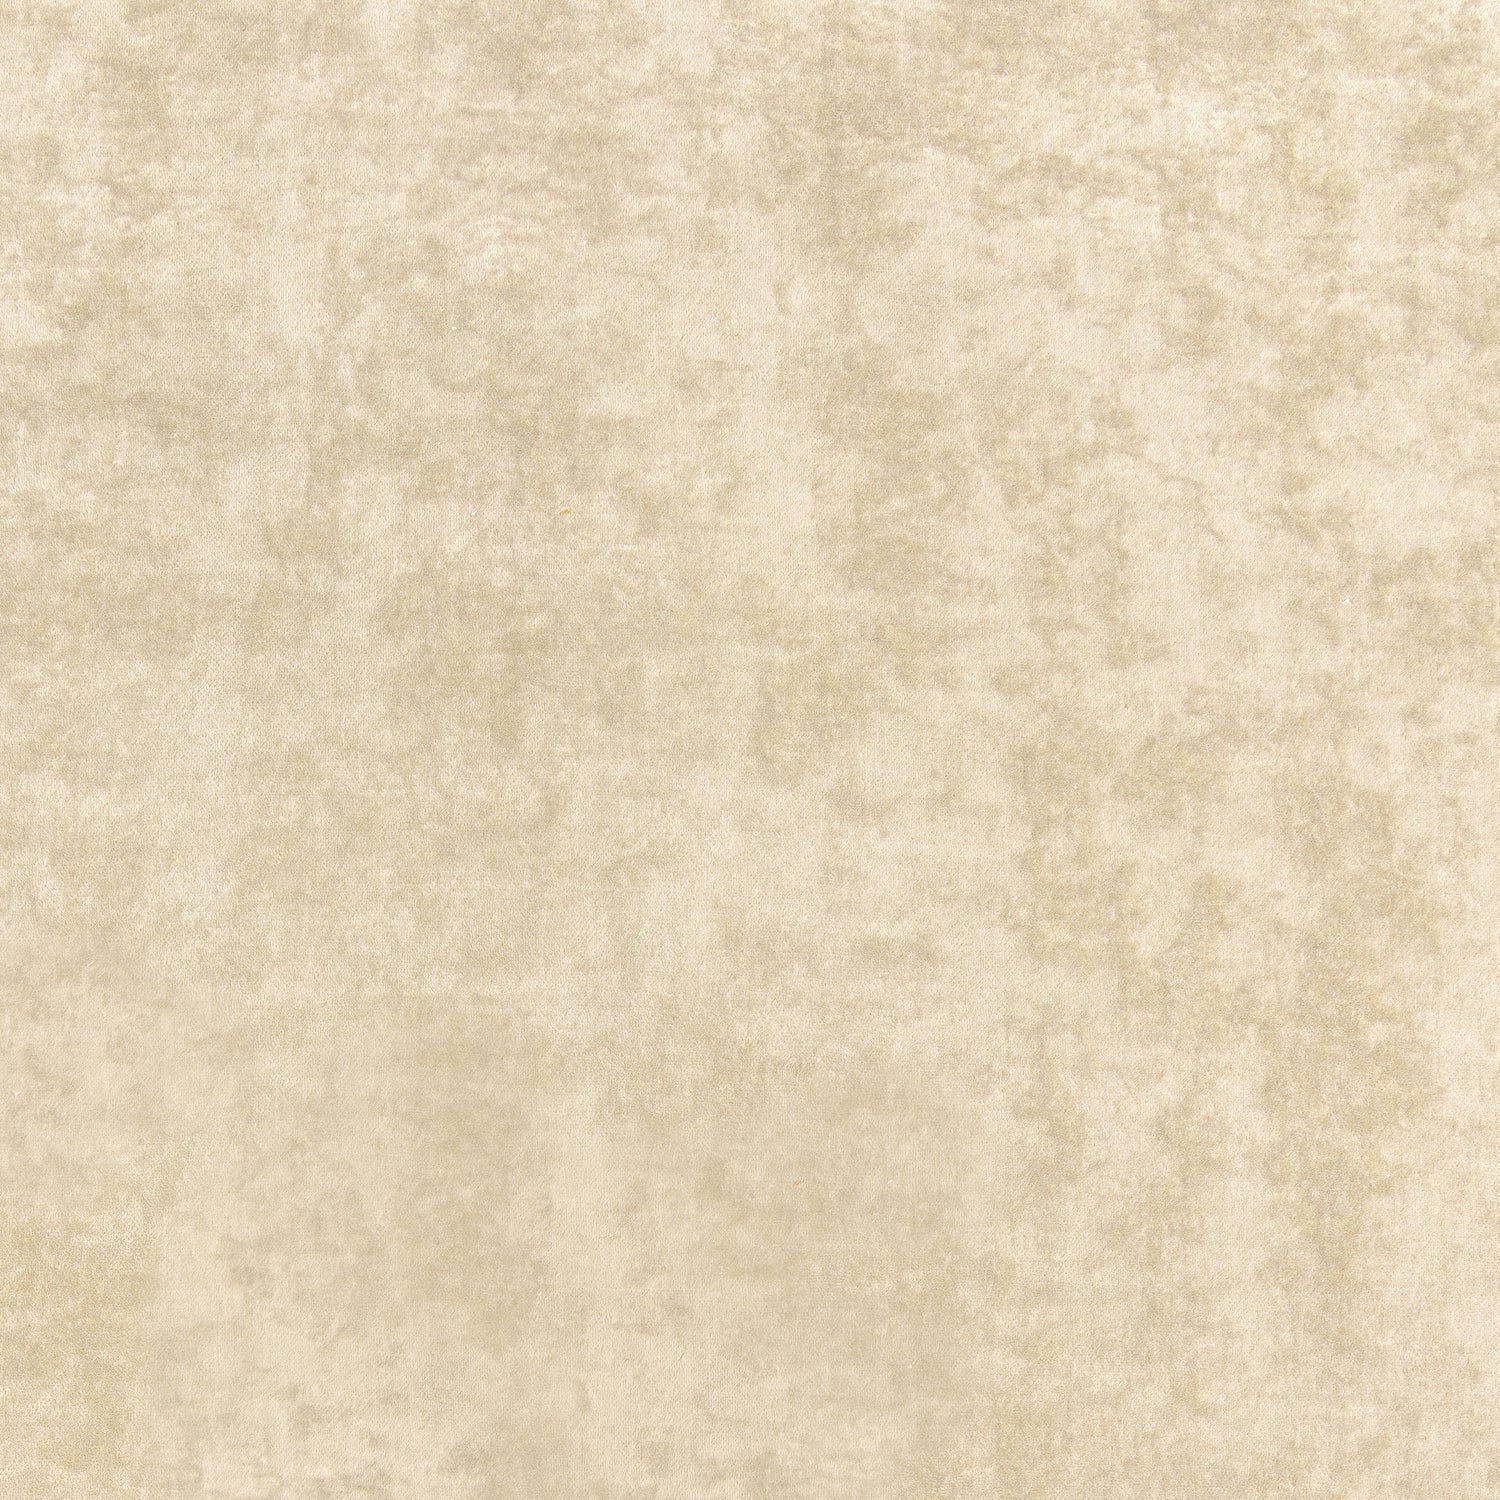 Celeste Velvet fabric in sand color - pattern number W8967 - by Thibaut in the Lyra Velvets collection